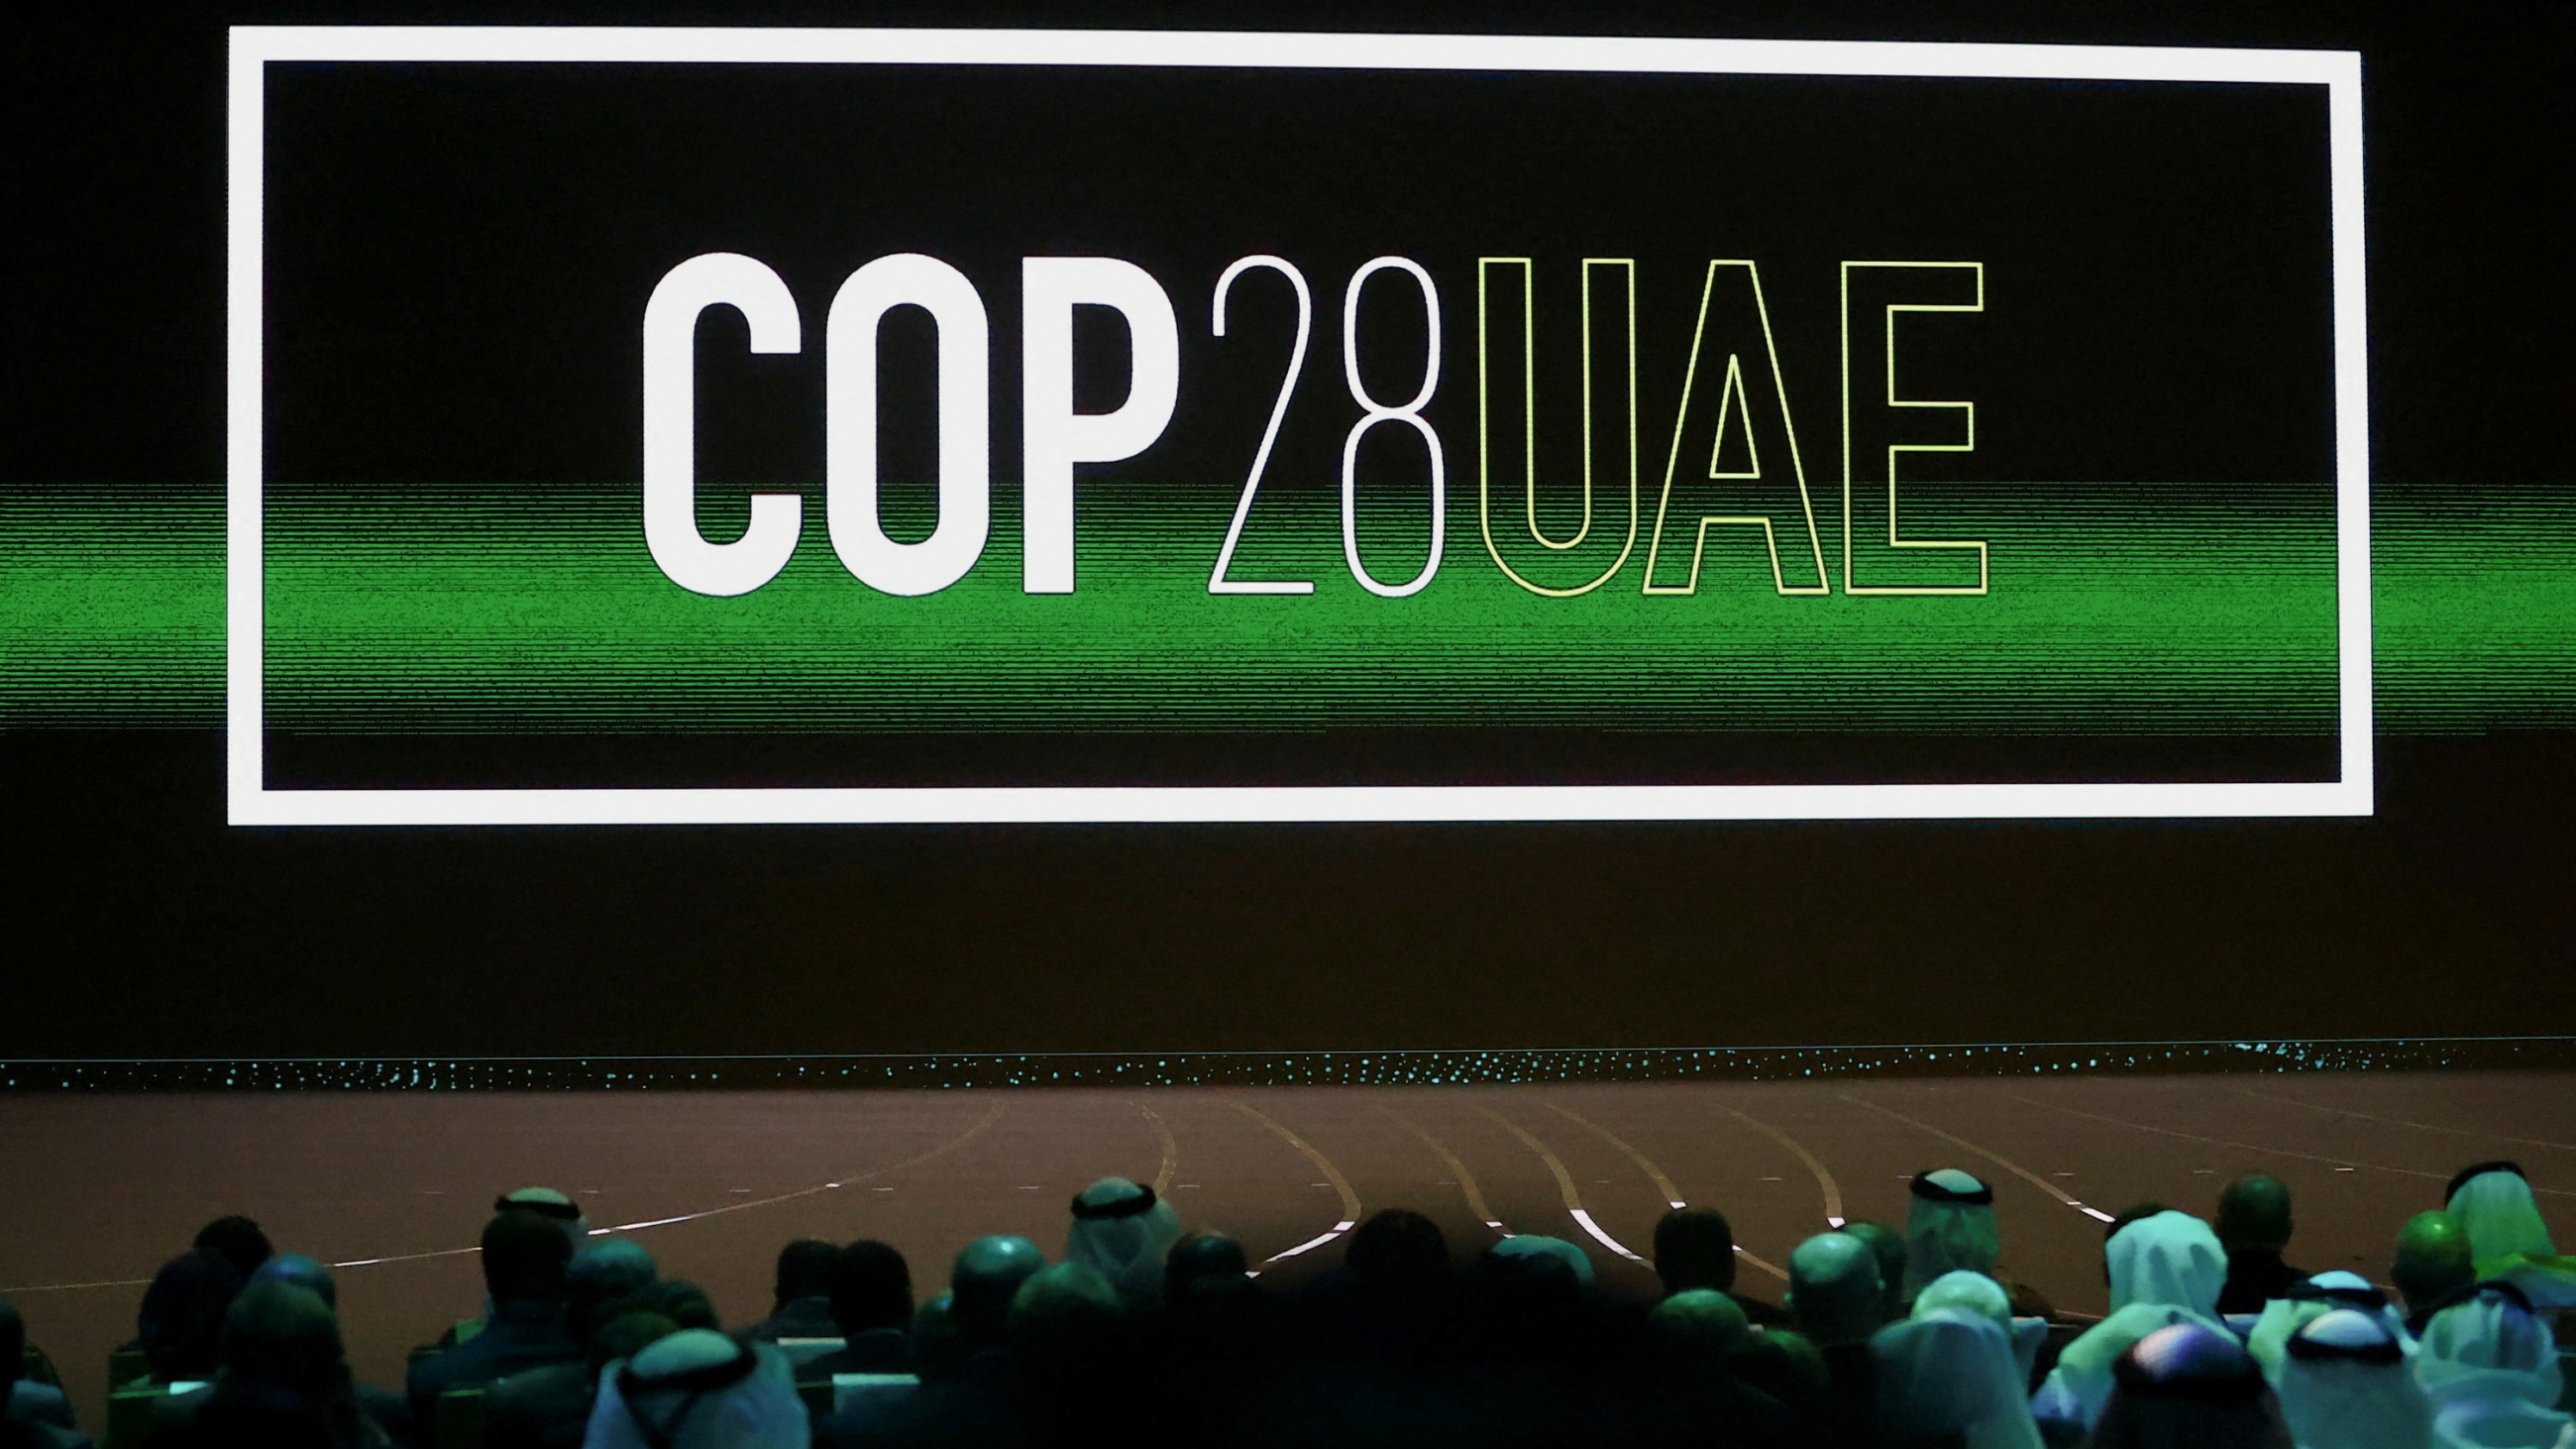 'Cop28 UAE' logo is displayed on the screen during the opening ceremony of Abu Dhabi Sustainability Week (ADSW) in Abu Dhabi on 16 January 2023 (Reuters)